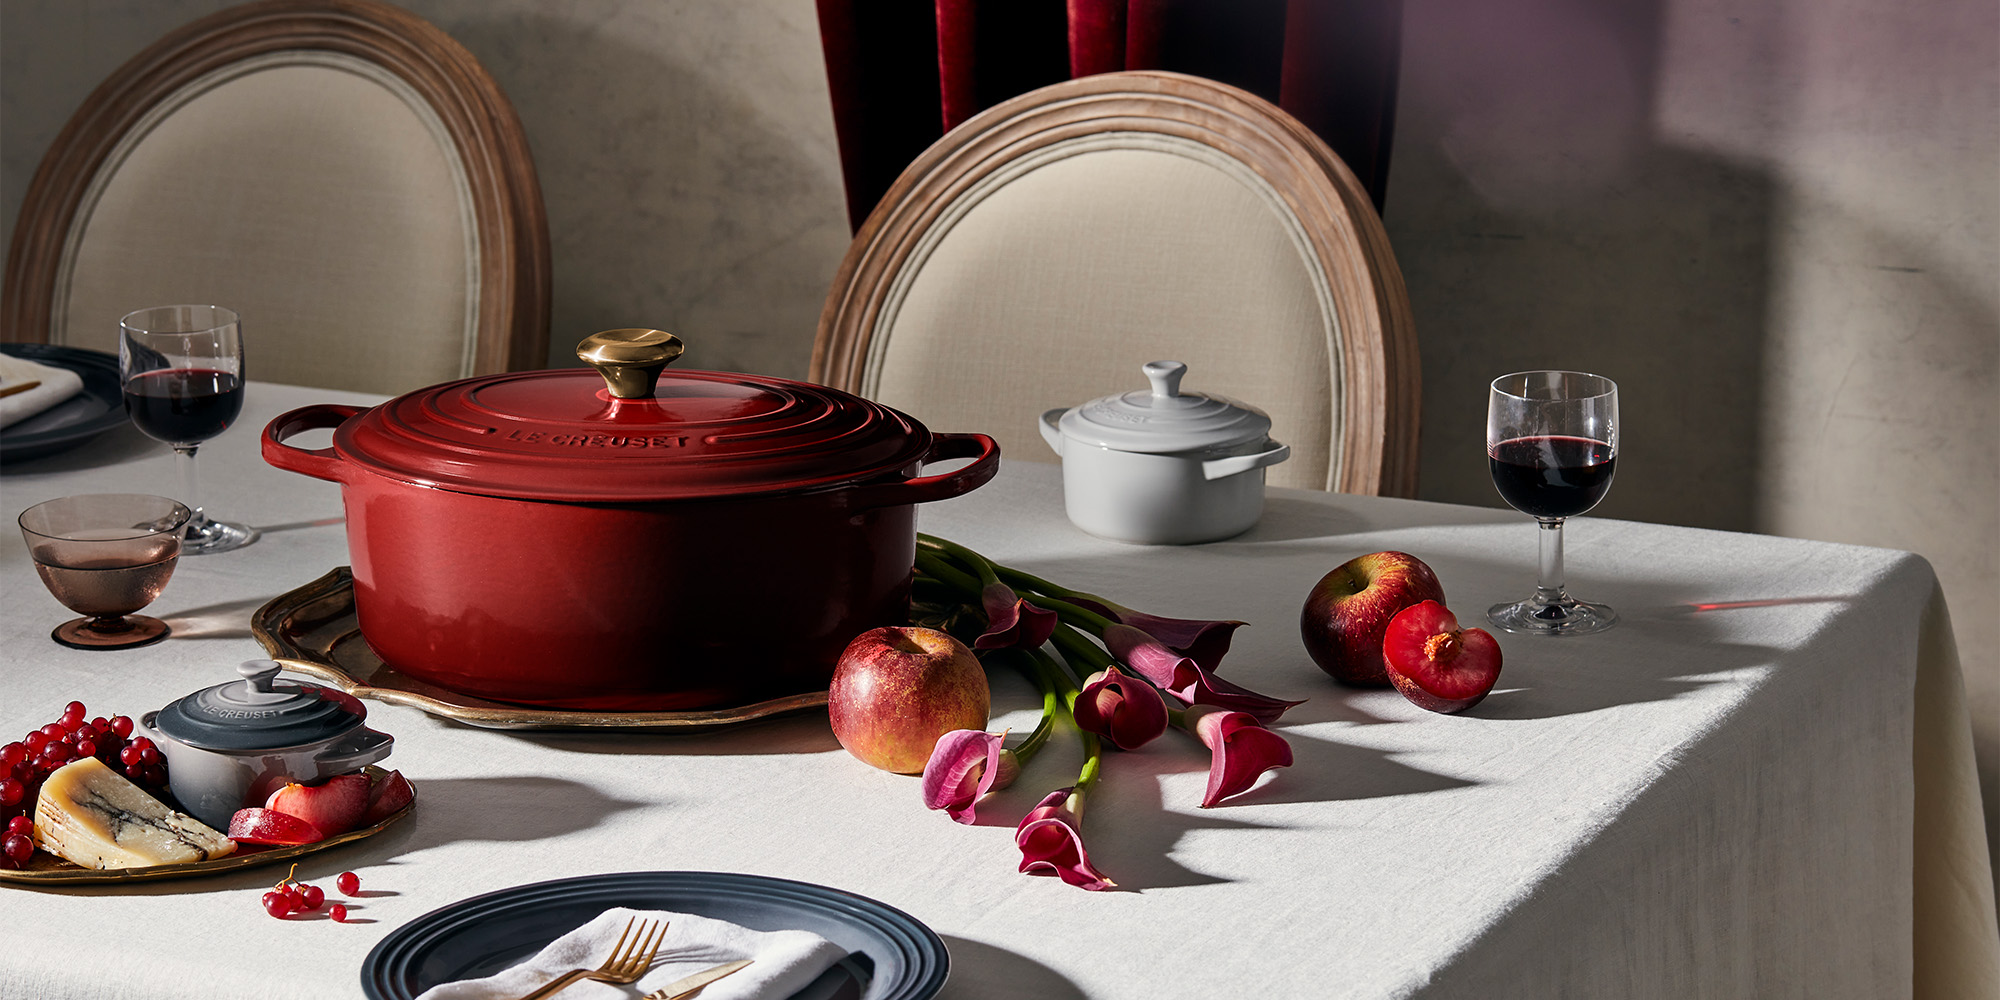 Le Creuset Launches New Fall 2022 Color Nutmeg